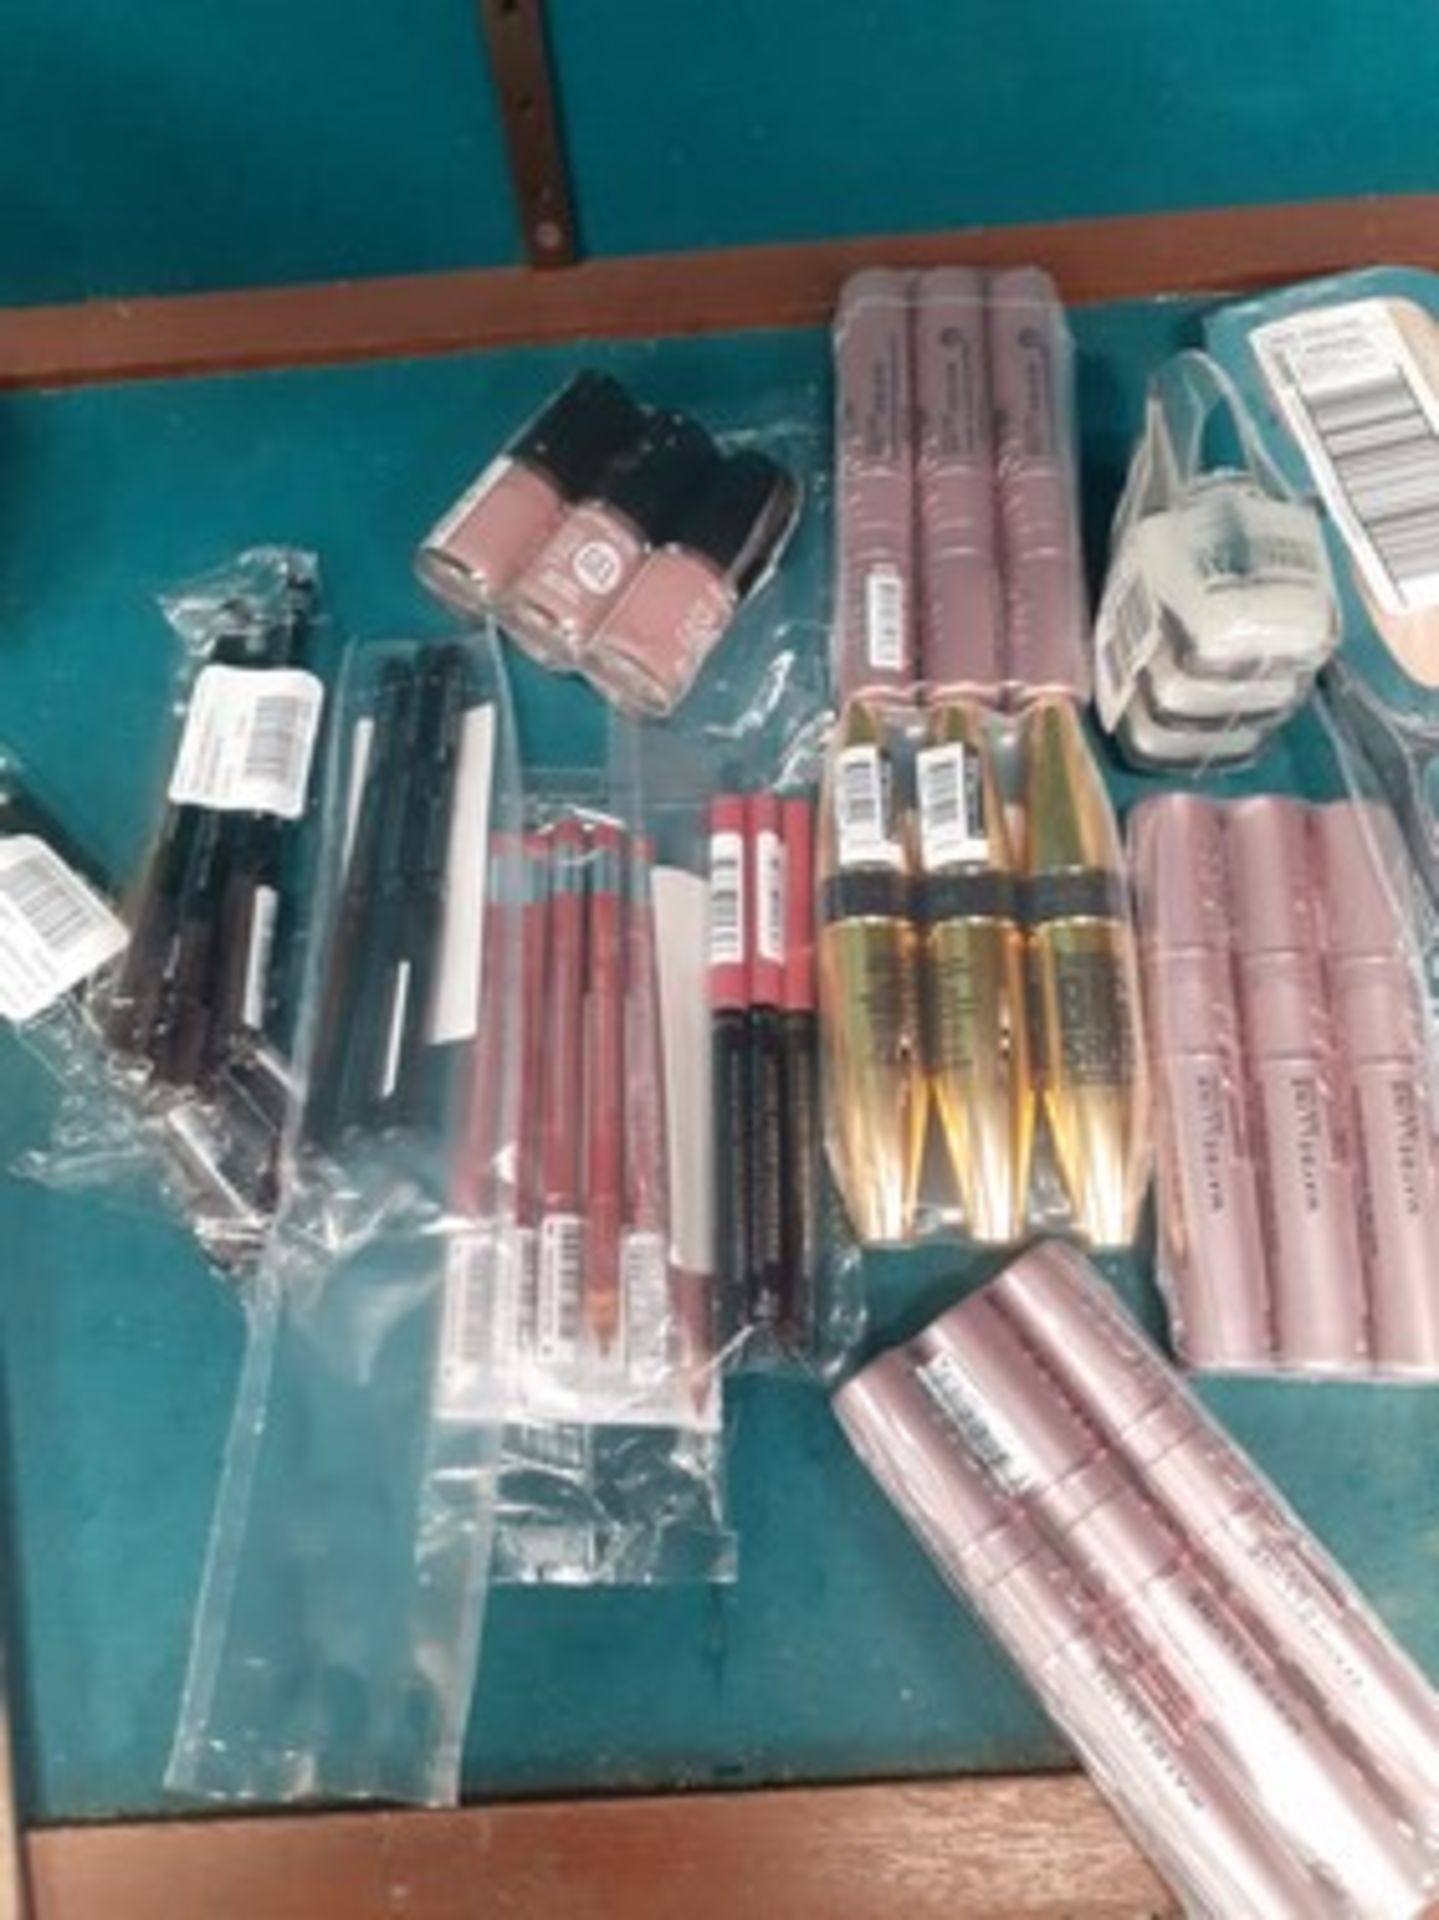 A good quantity of cosmetics by Maybelline, L'Oreal and Rimmel including, mascara, foundation, - Image 3 of 4